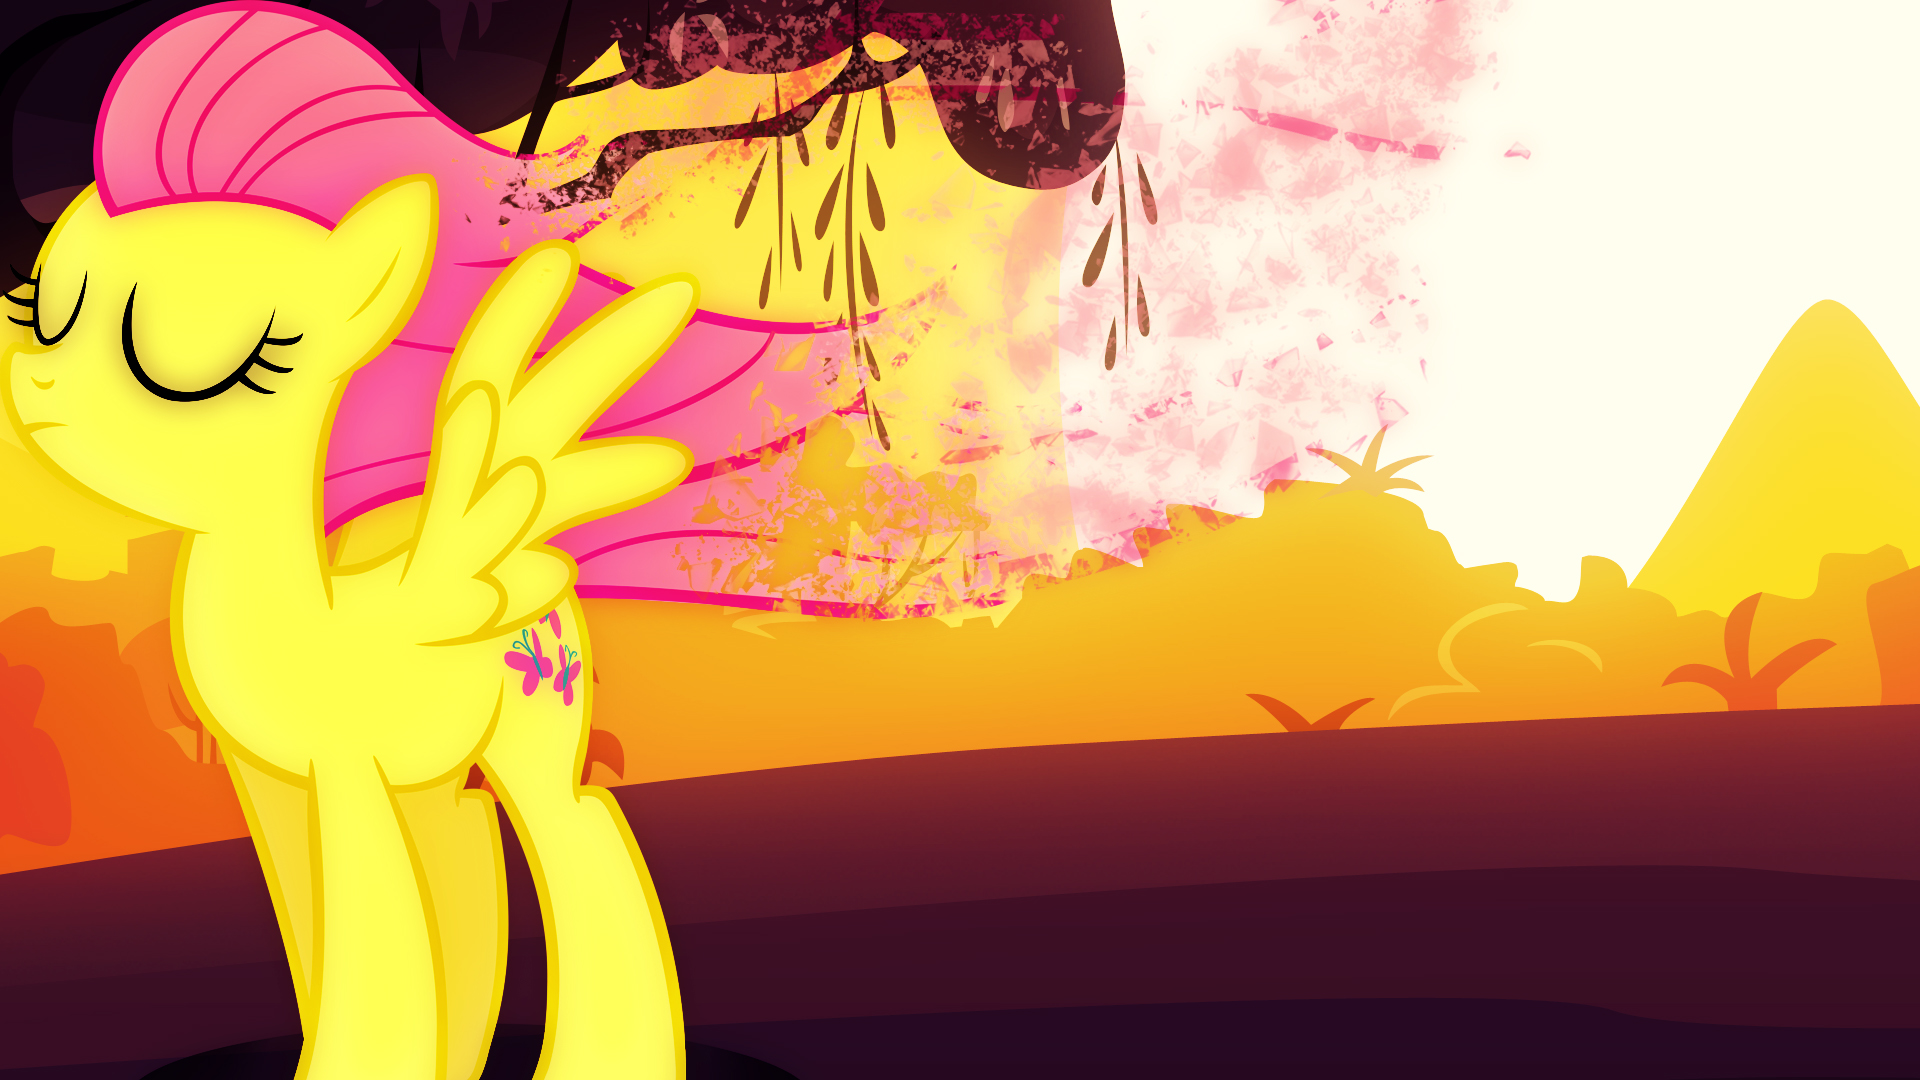 A Mare From Sunset by AnEvilZebra, Karl97 and knight33